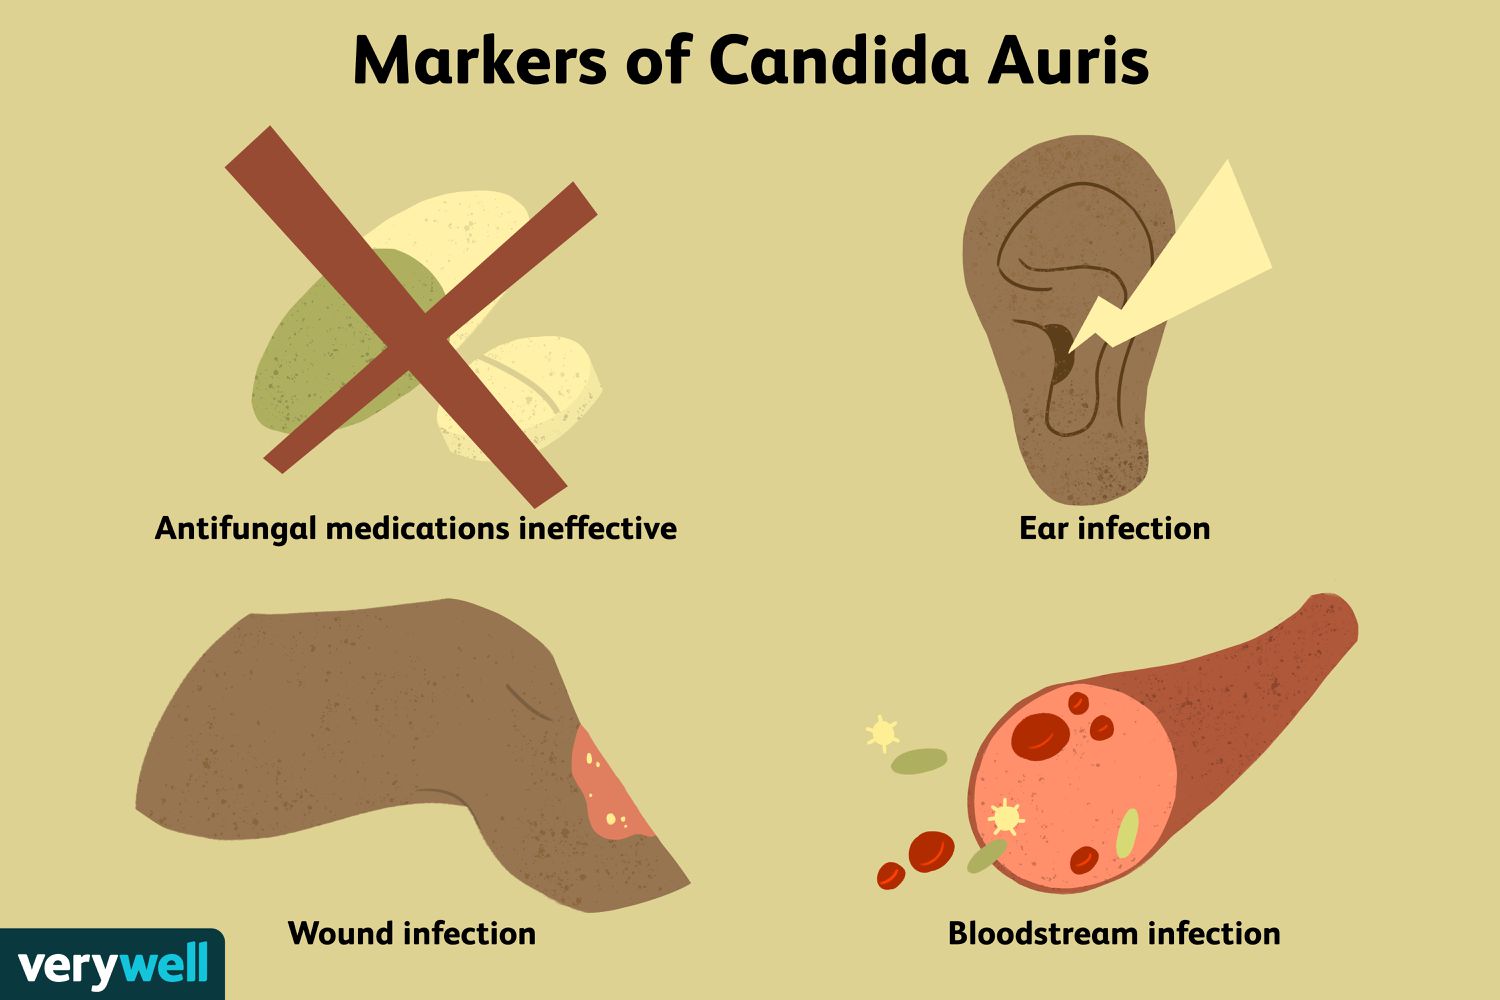 Visual representation of markers of Candida auris